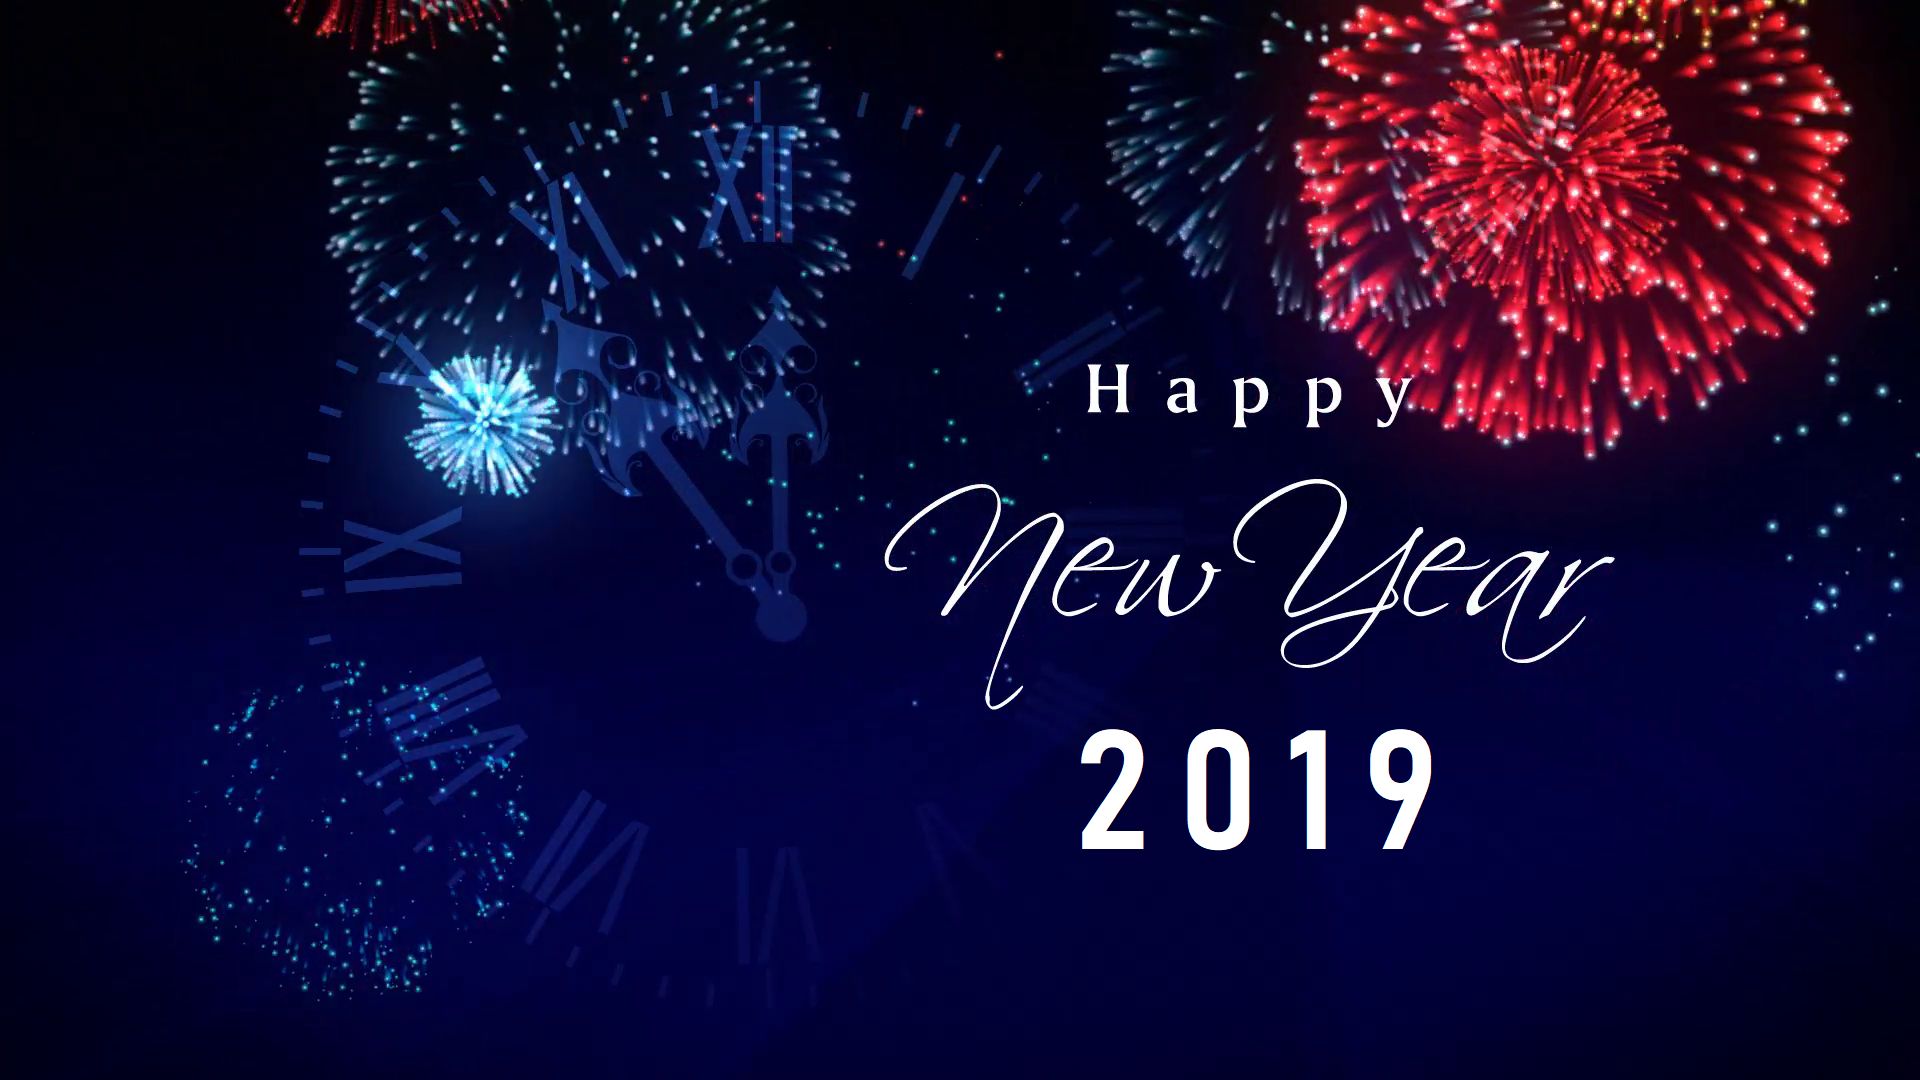 happy new year, holiday, new year 2019, fireworks, night cellphone